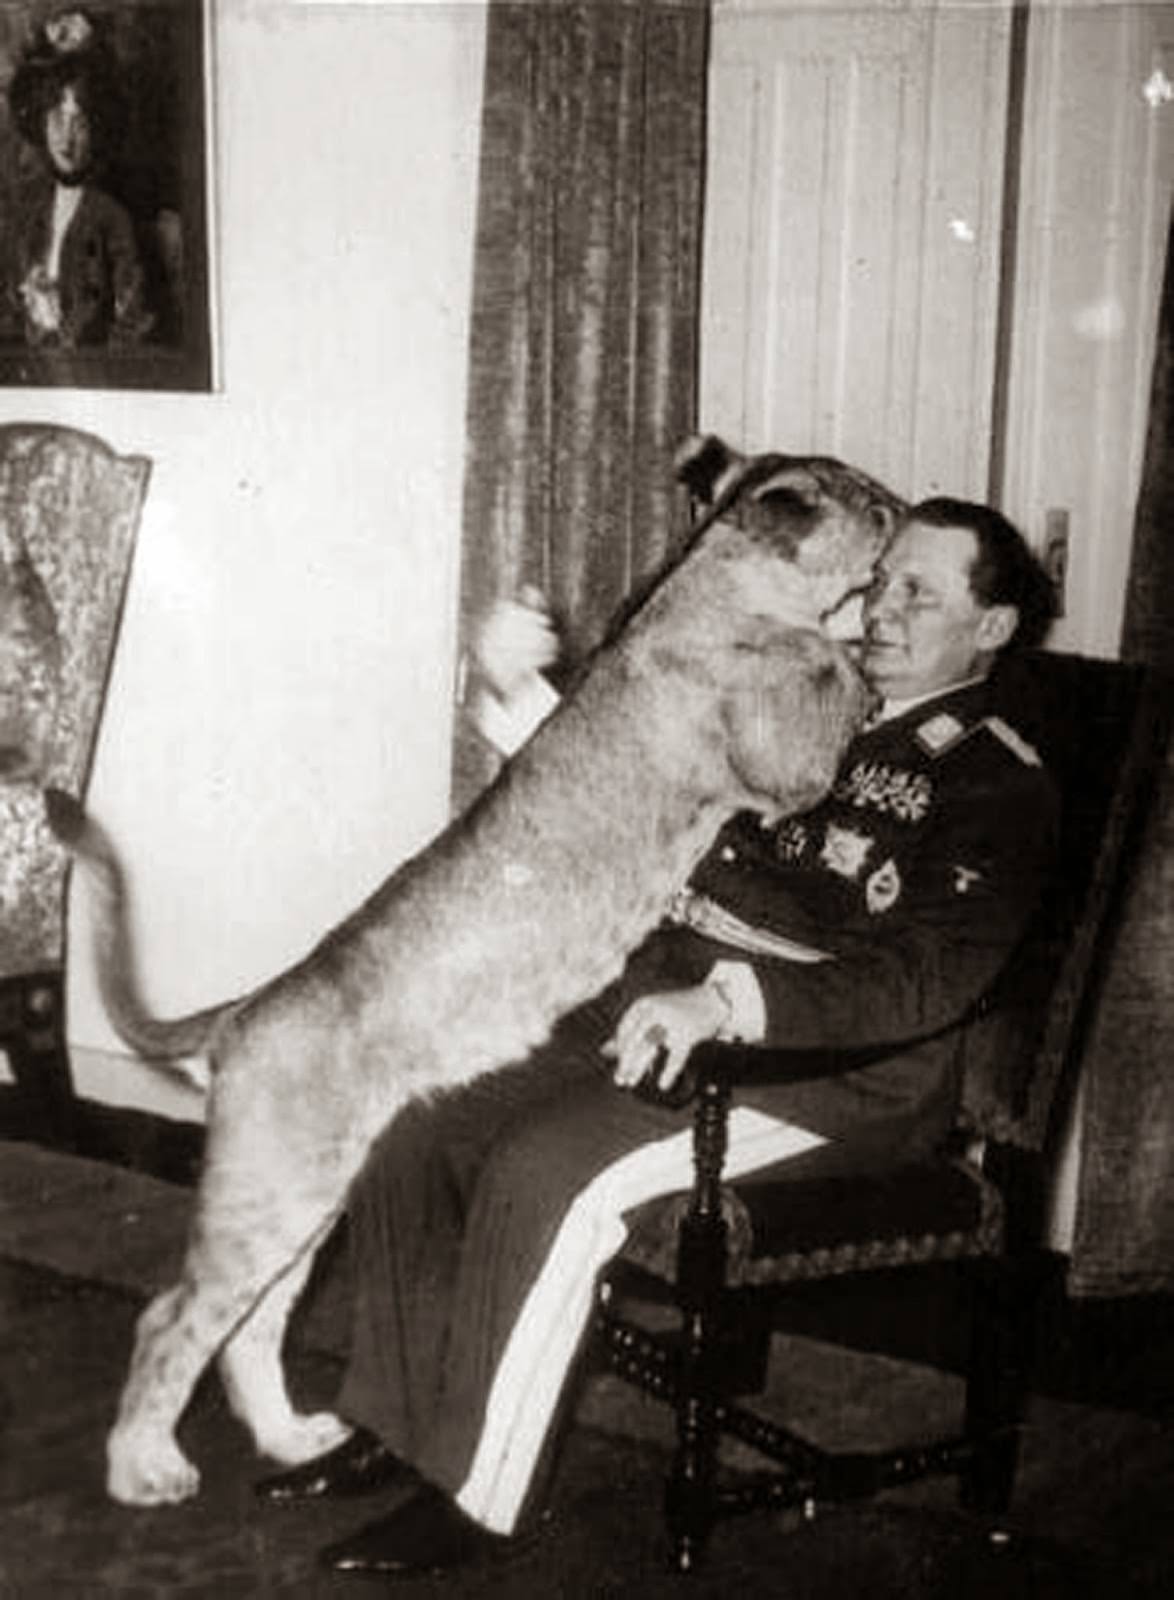 Hermann Göring with his pet lion at his home in Germany in 1936. Göring and his wife actually had a few lions as well as other exotic animals that they raised themselves, and spent a fortune feeding them at his home in their own small little zoo. He even helped protect endangered wild life during the war. He spent tons of money ensuring certain animals survival during WWII like the Polish Bison, something he never did for any people including his own.